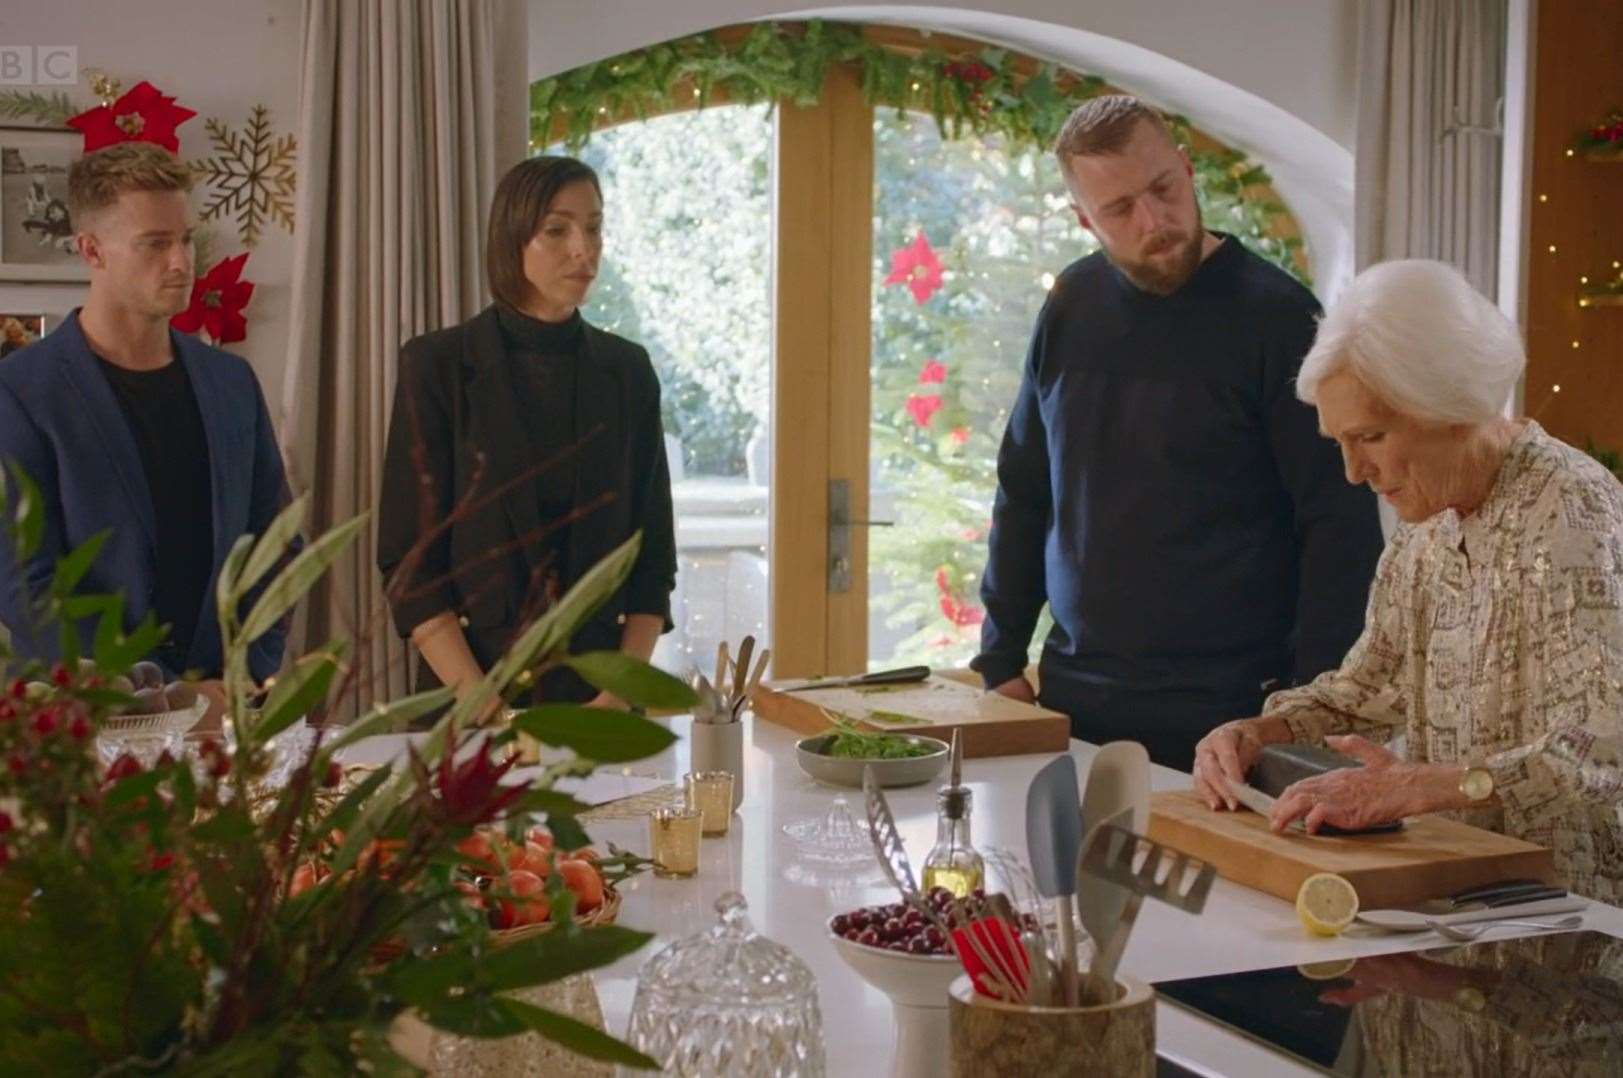 Mary Berry taught the three 'cooking novices' how to cook up a festive feast. Picture: BBC/Mary Berry's Festive Feasts